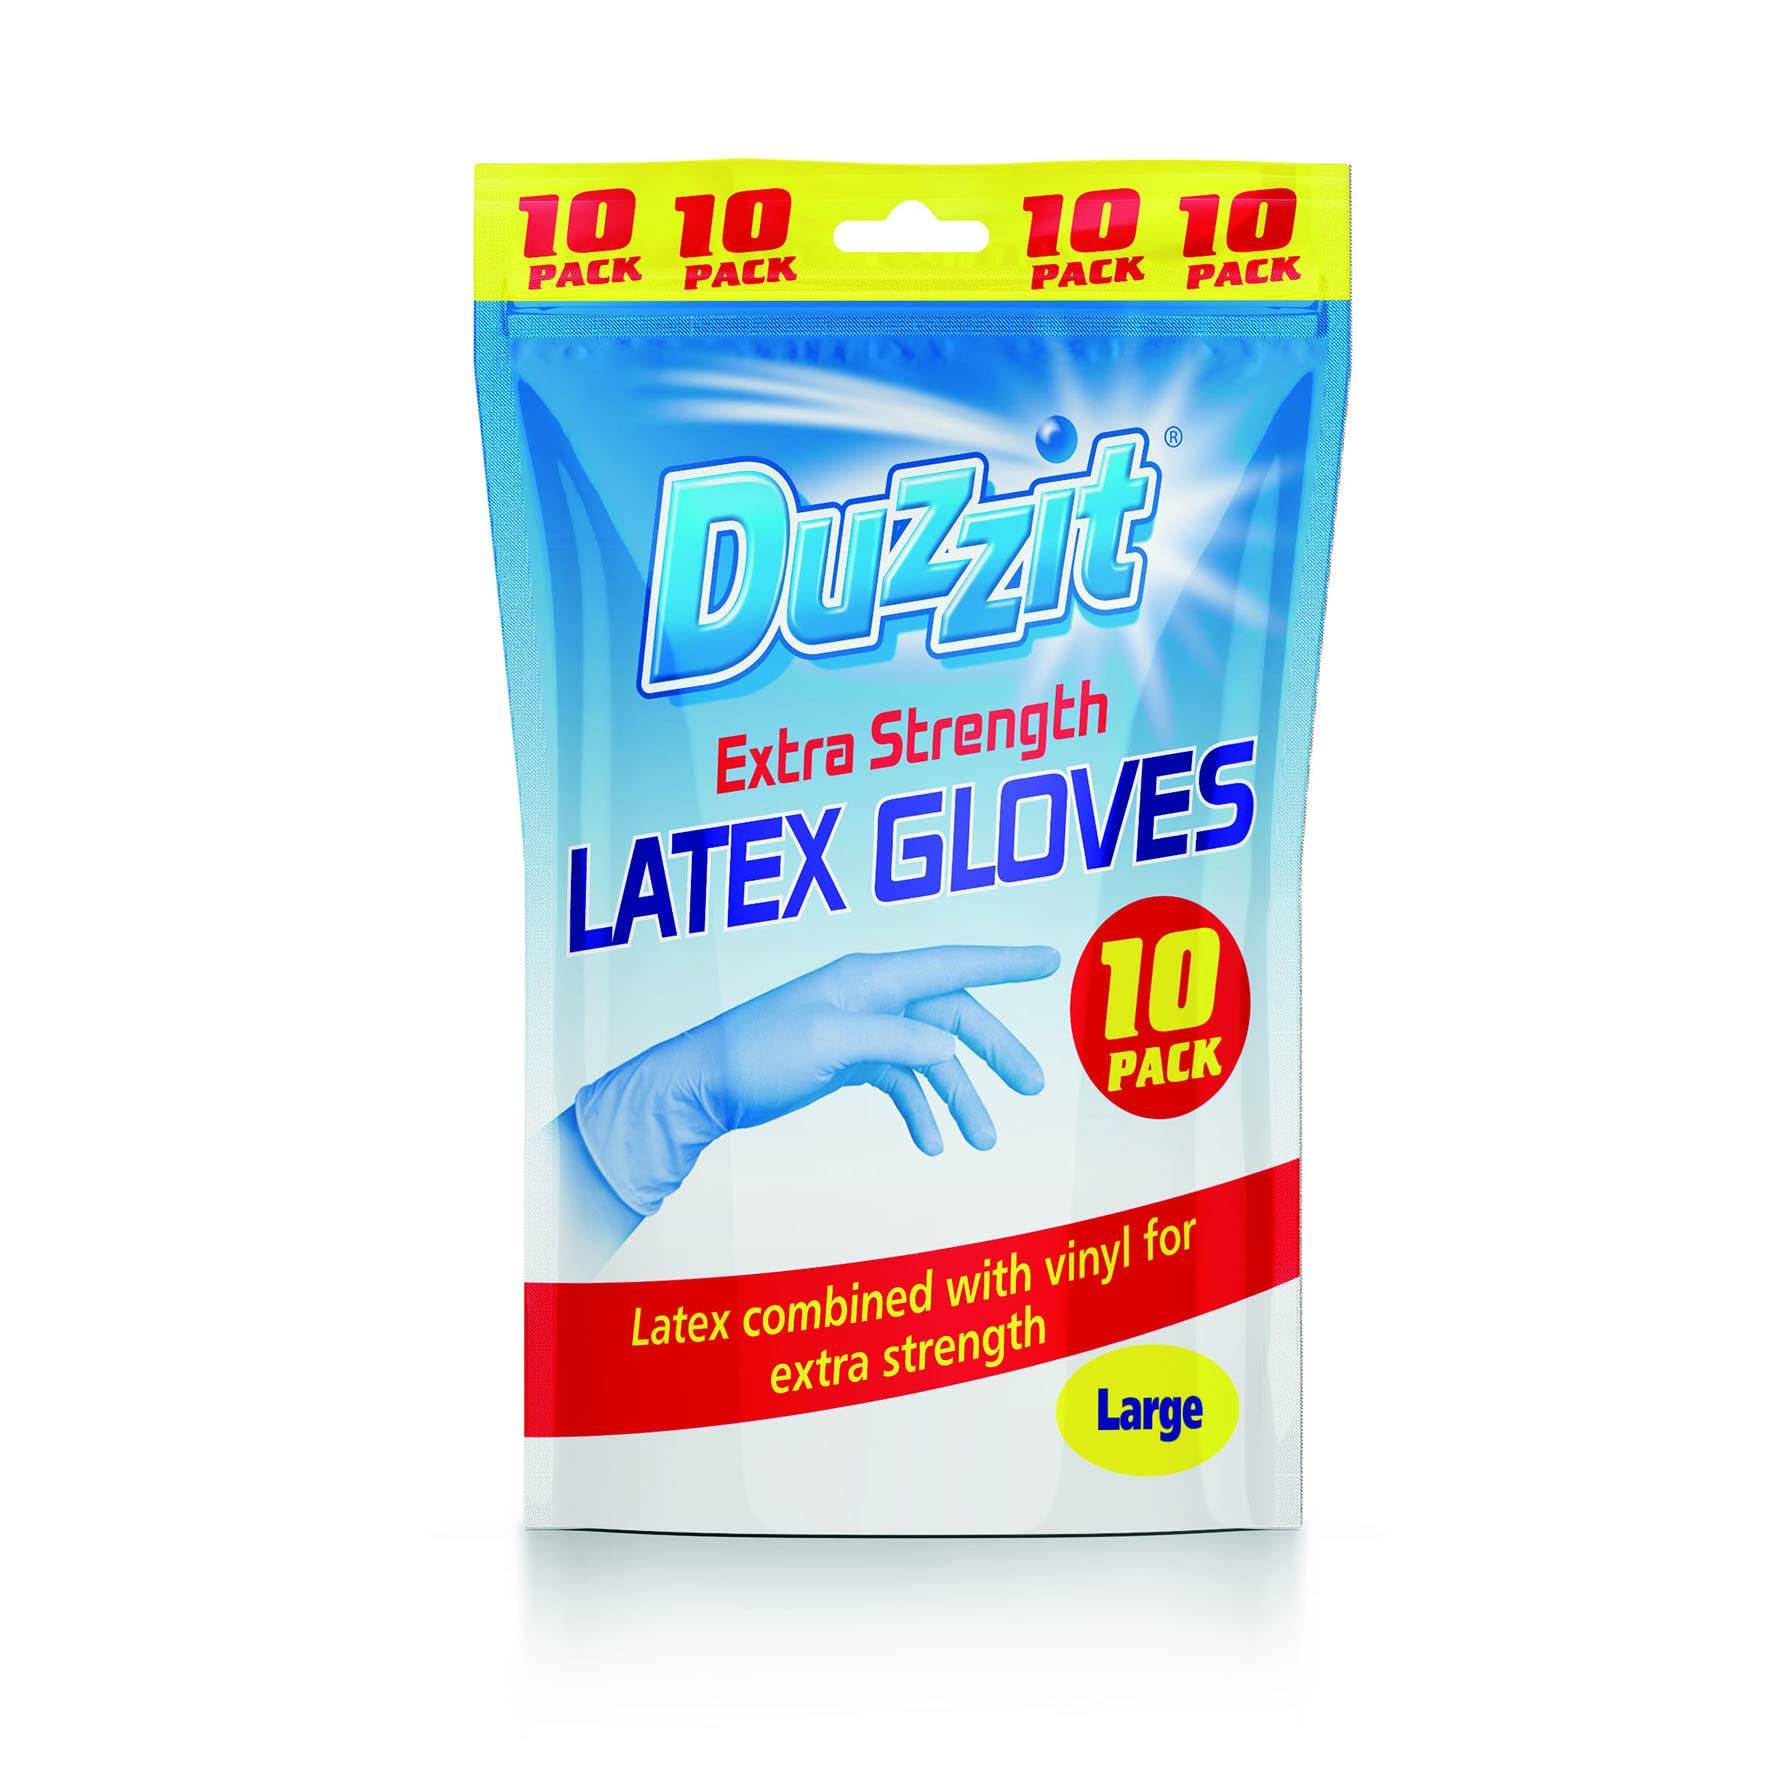 Duzzit Latex Gloves, Large, 10 Pack